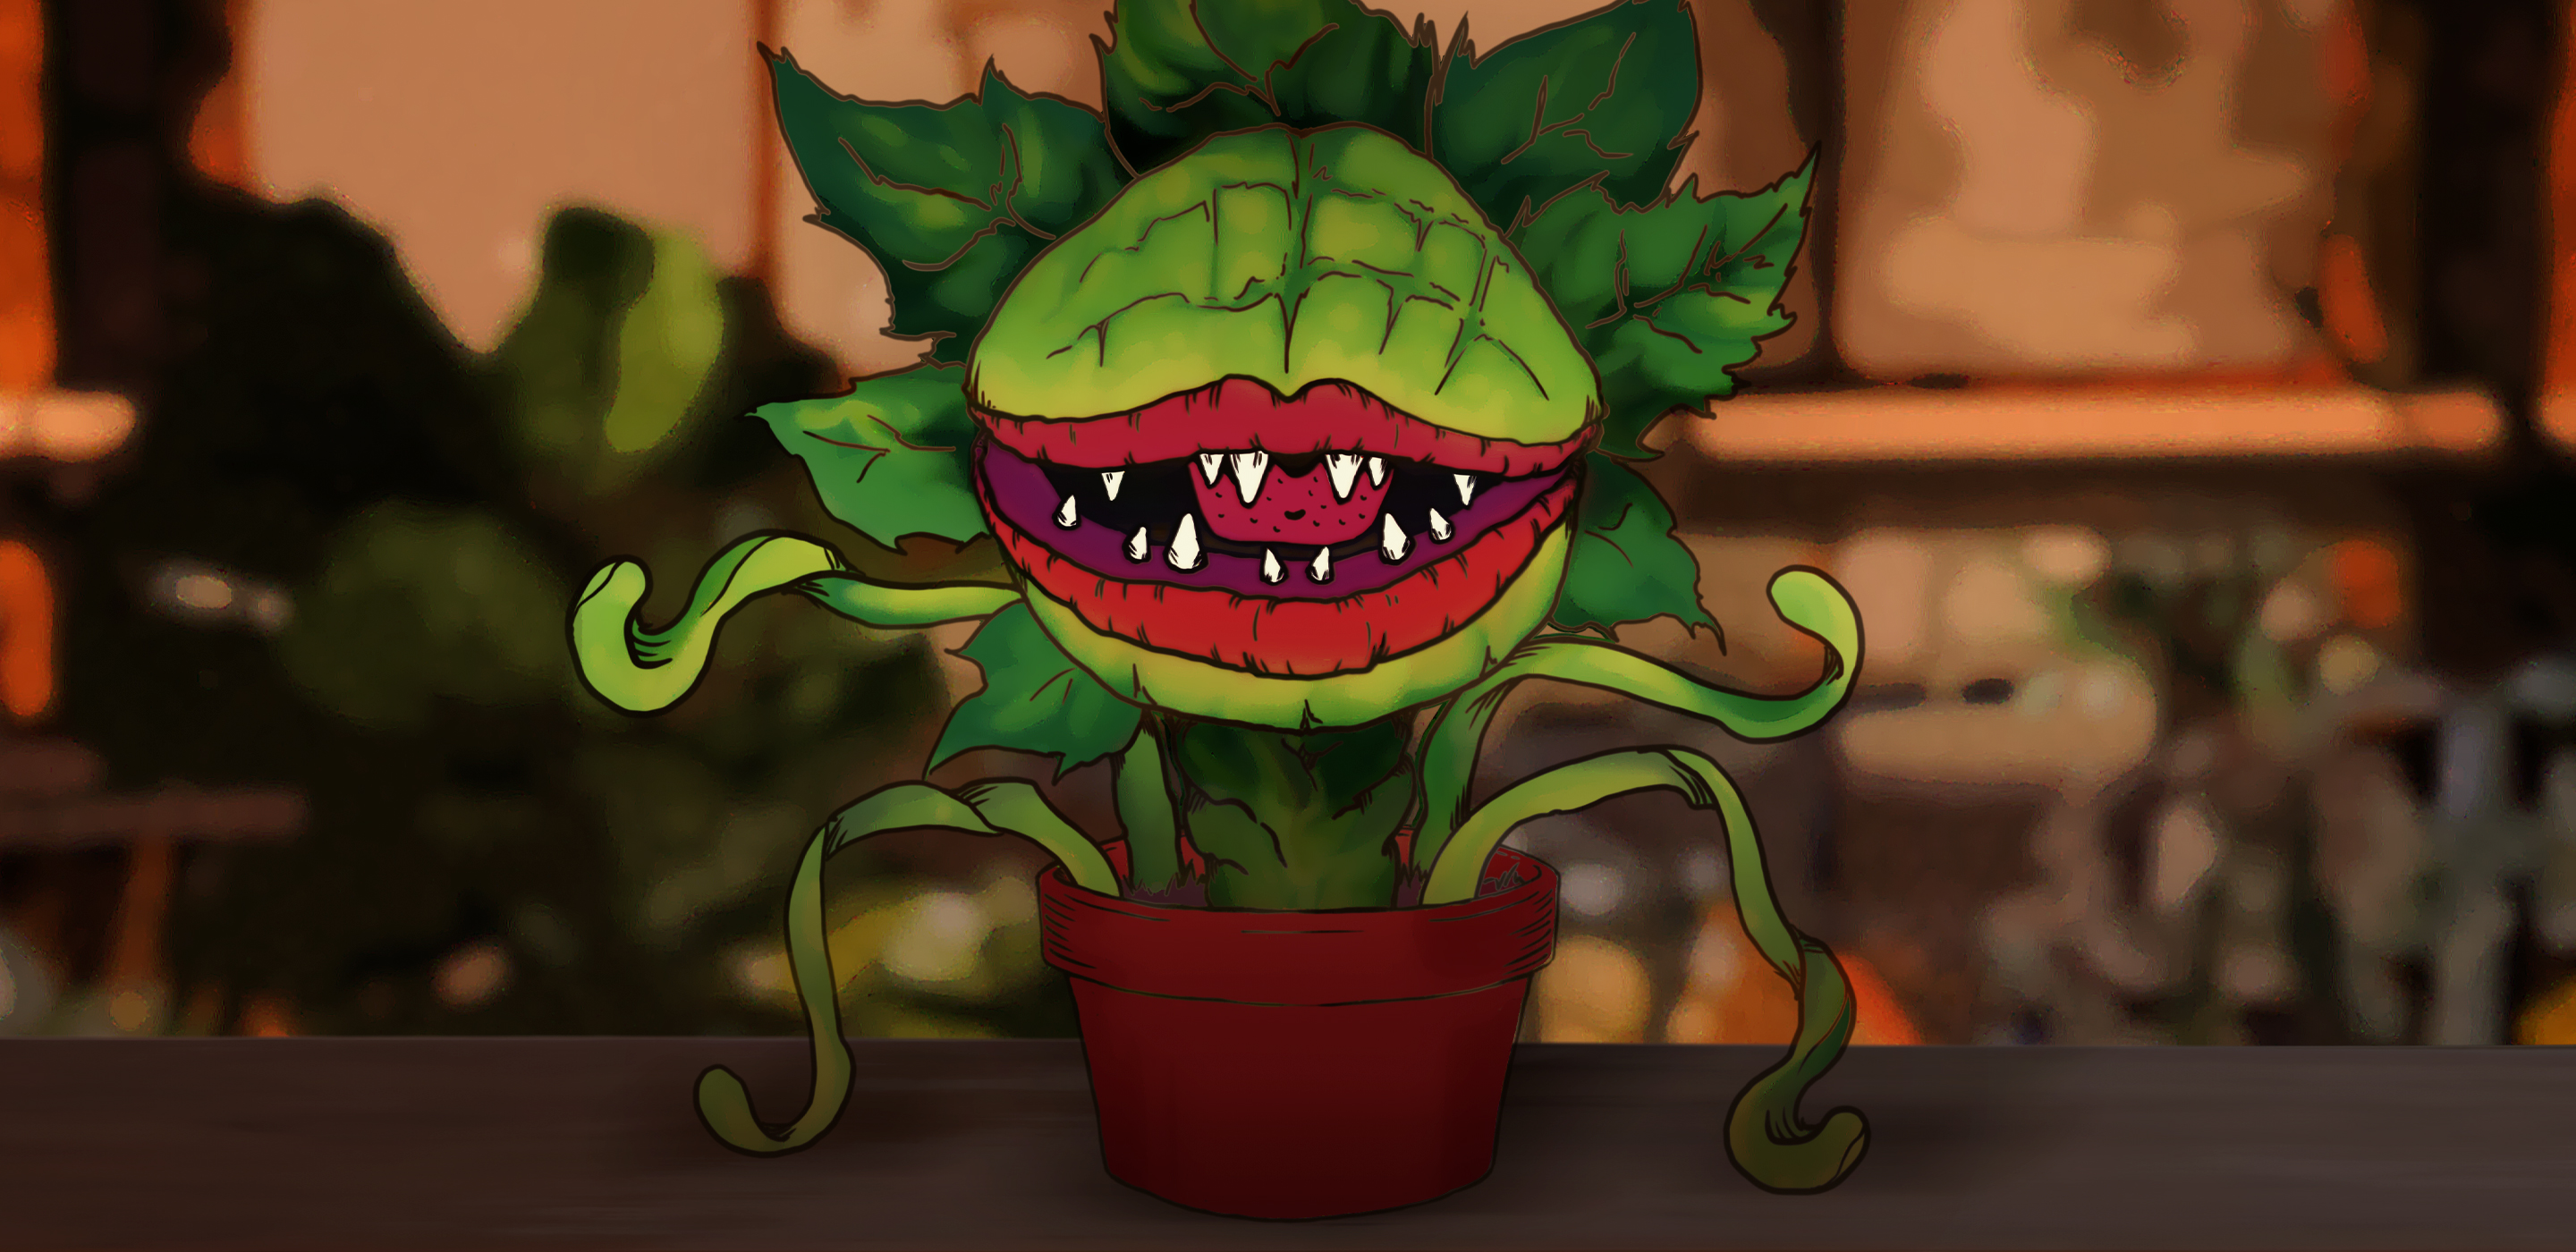 Drawing of a large venus flytrap with lips and teeth in a pot. The background shows a flower shop.